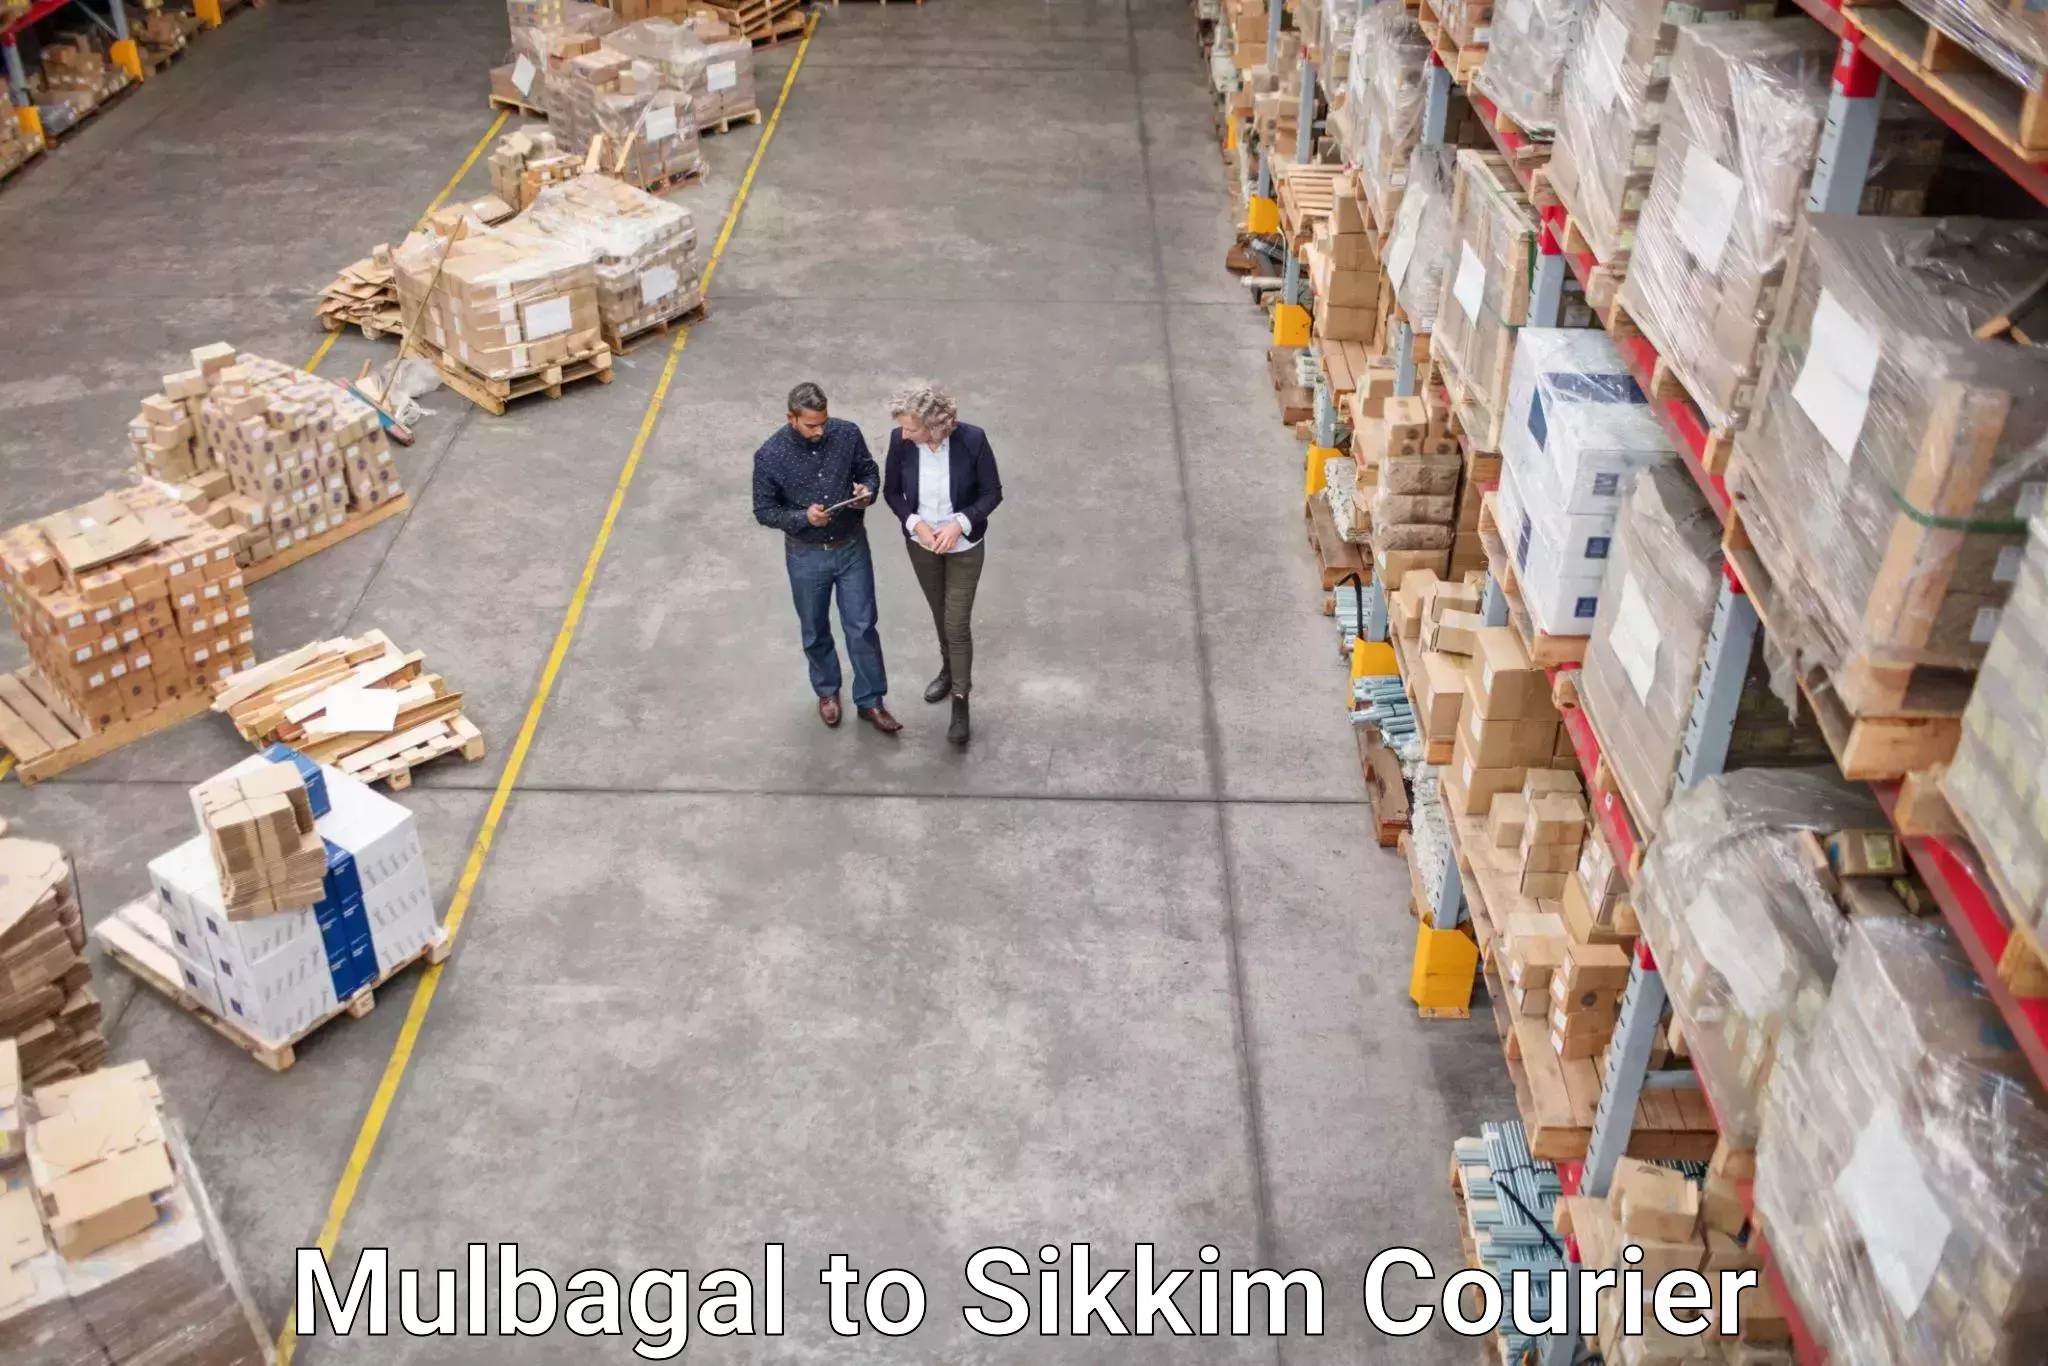 Courier service innovation in Mulbagal to Sikkim